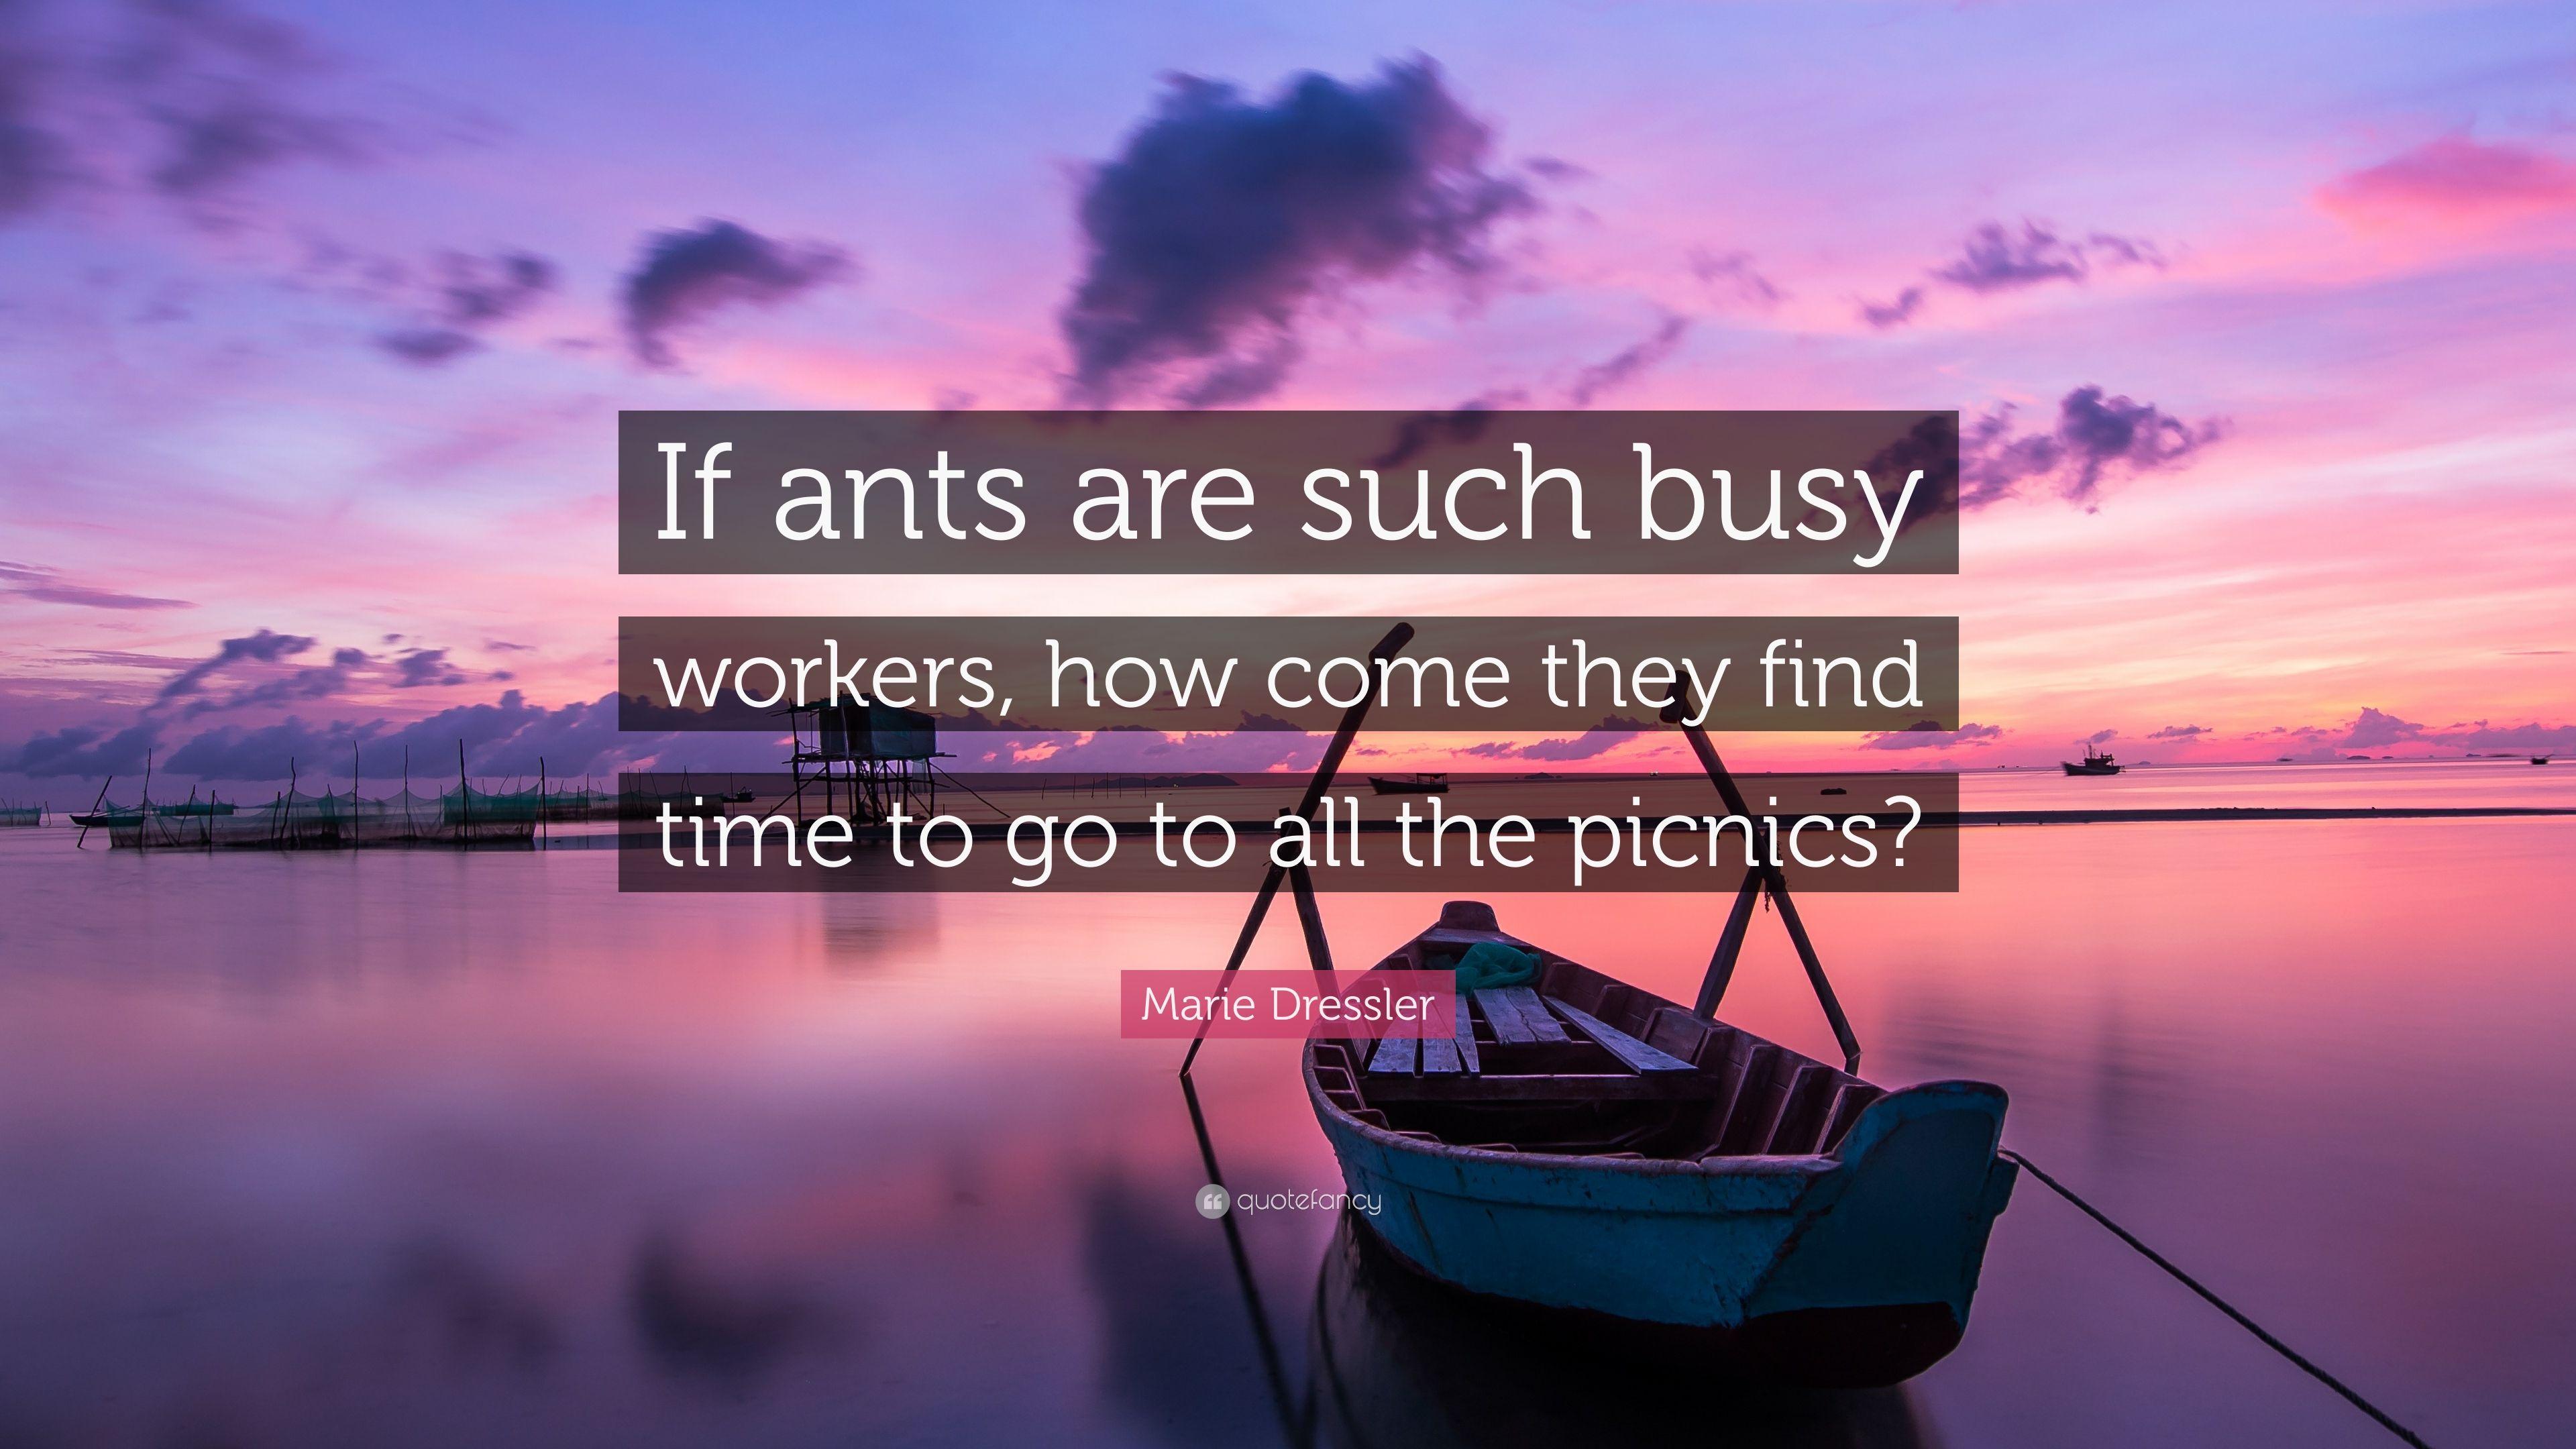 Marie Dressler Quote: “If ants are such busy workers, how come they